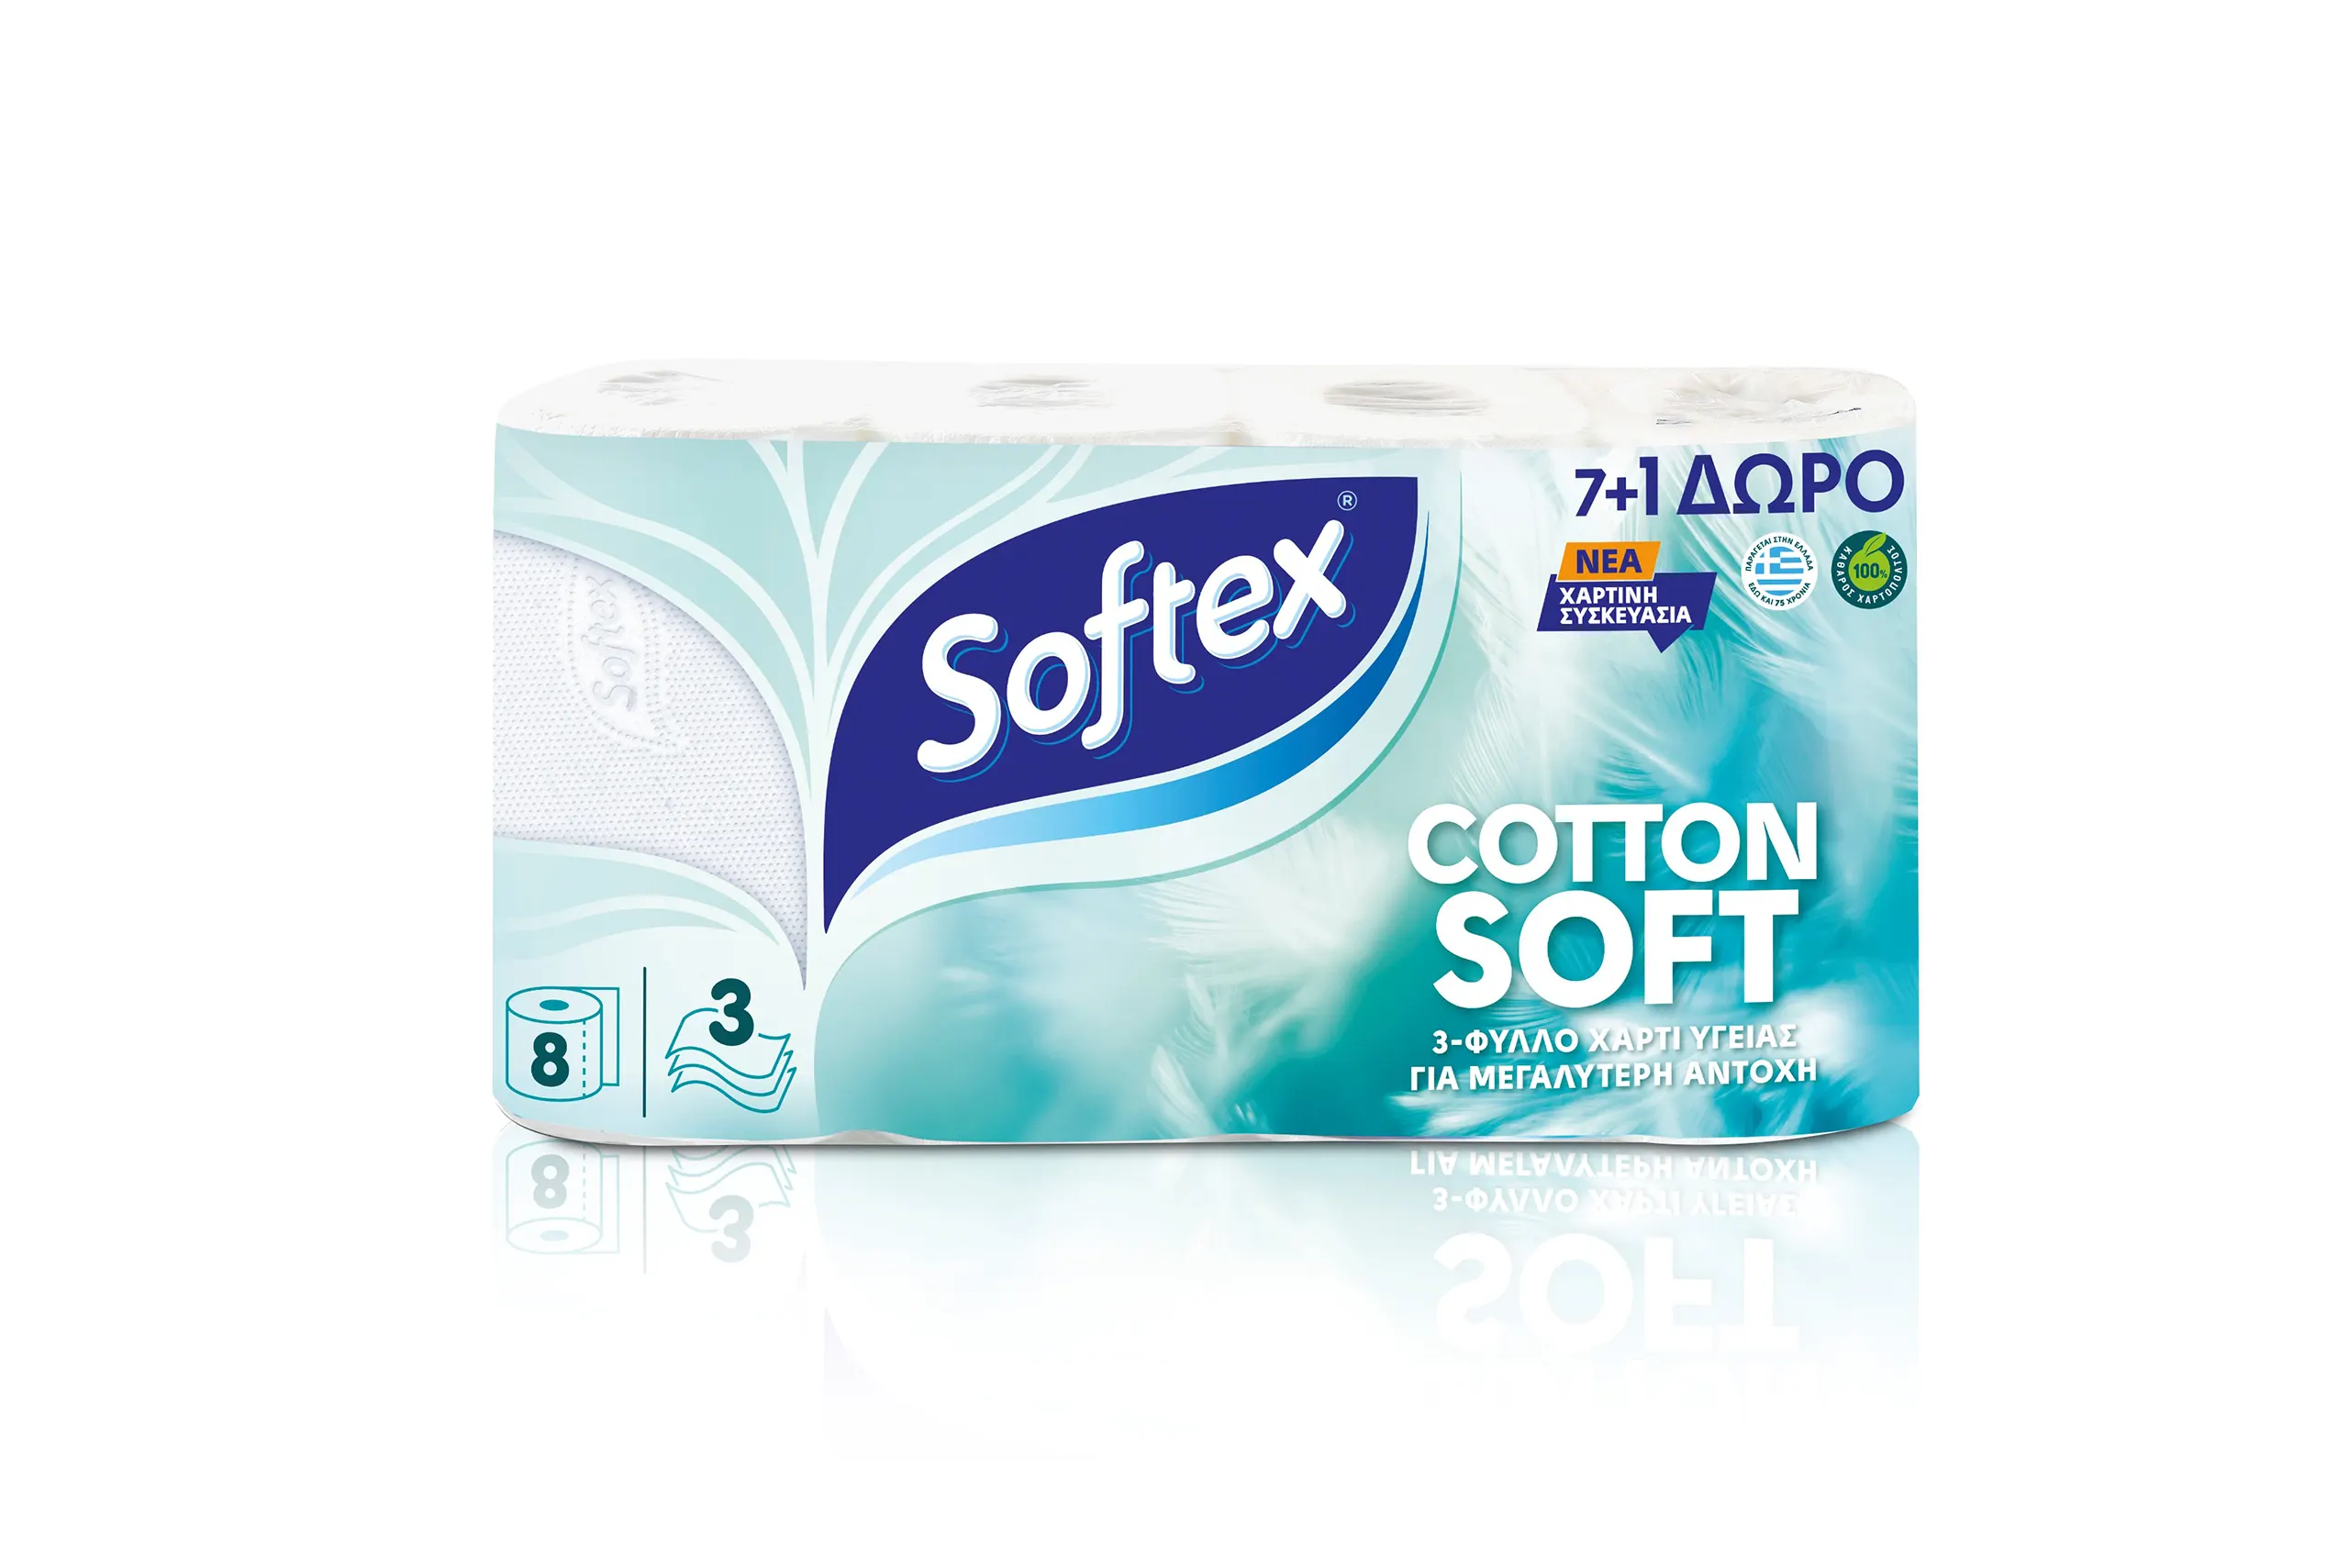 COTTON SOFT PAPER PACKAGING – Softex